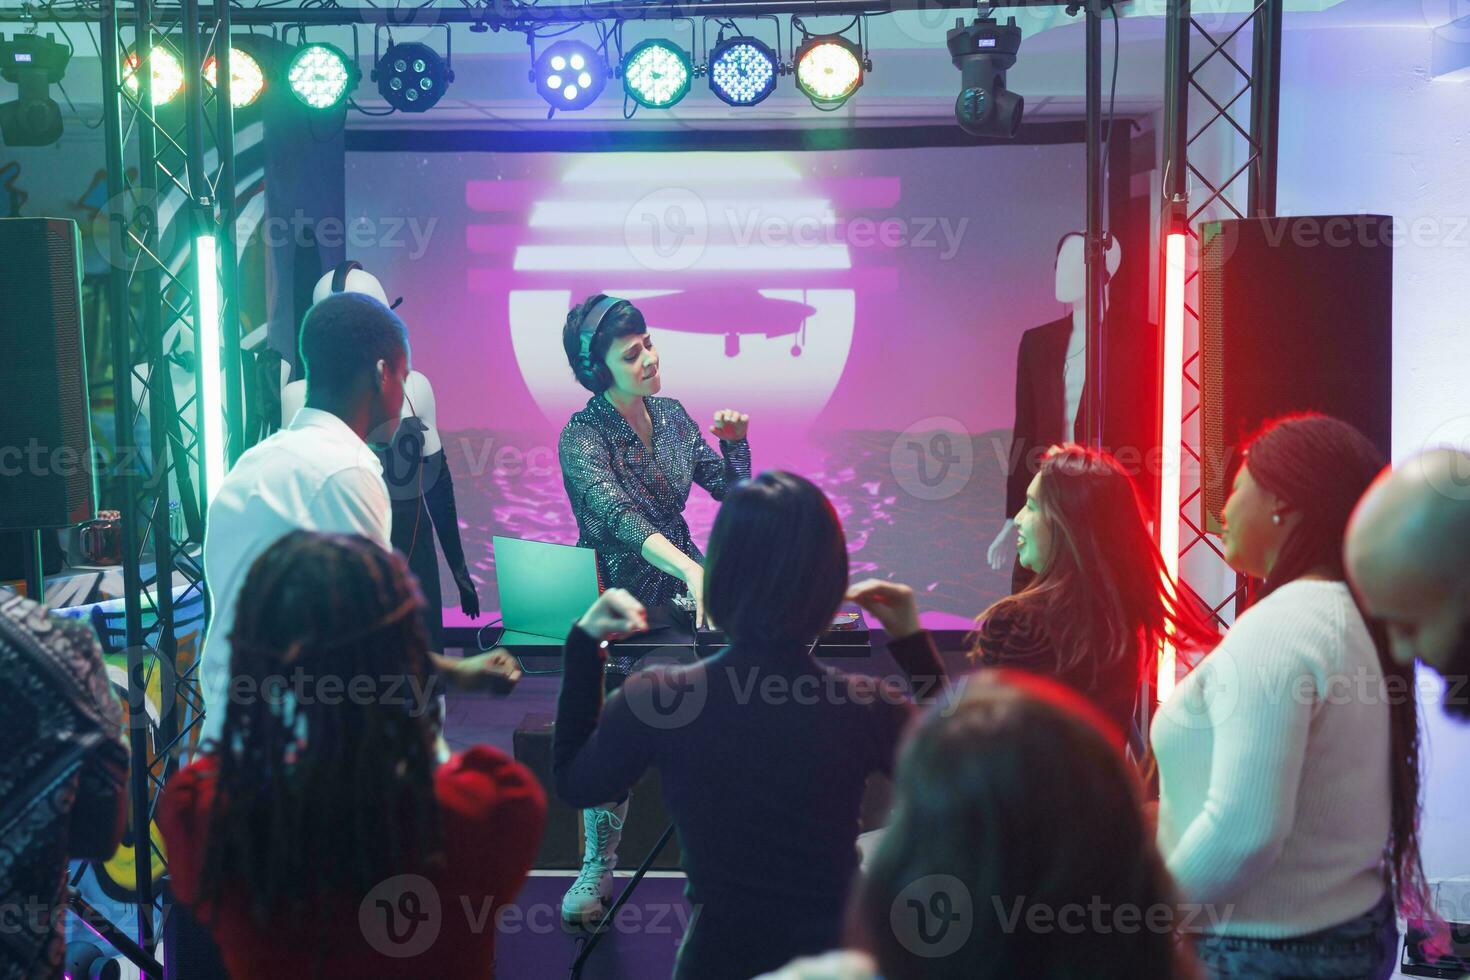 Energetic performer using dj station on stage to mix electronic music while crowd partying on dancefloor. Young people enjoying clubbing experience and dancing at concert photo